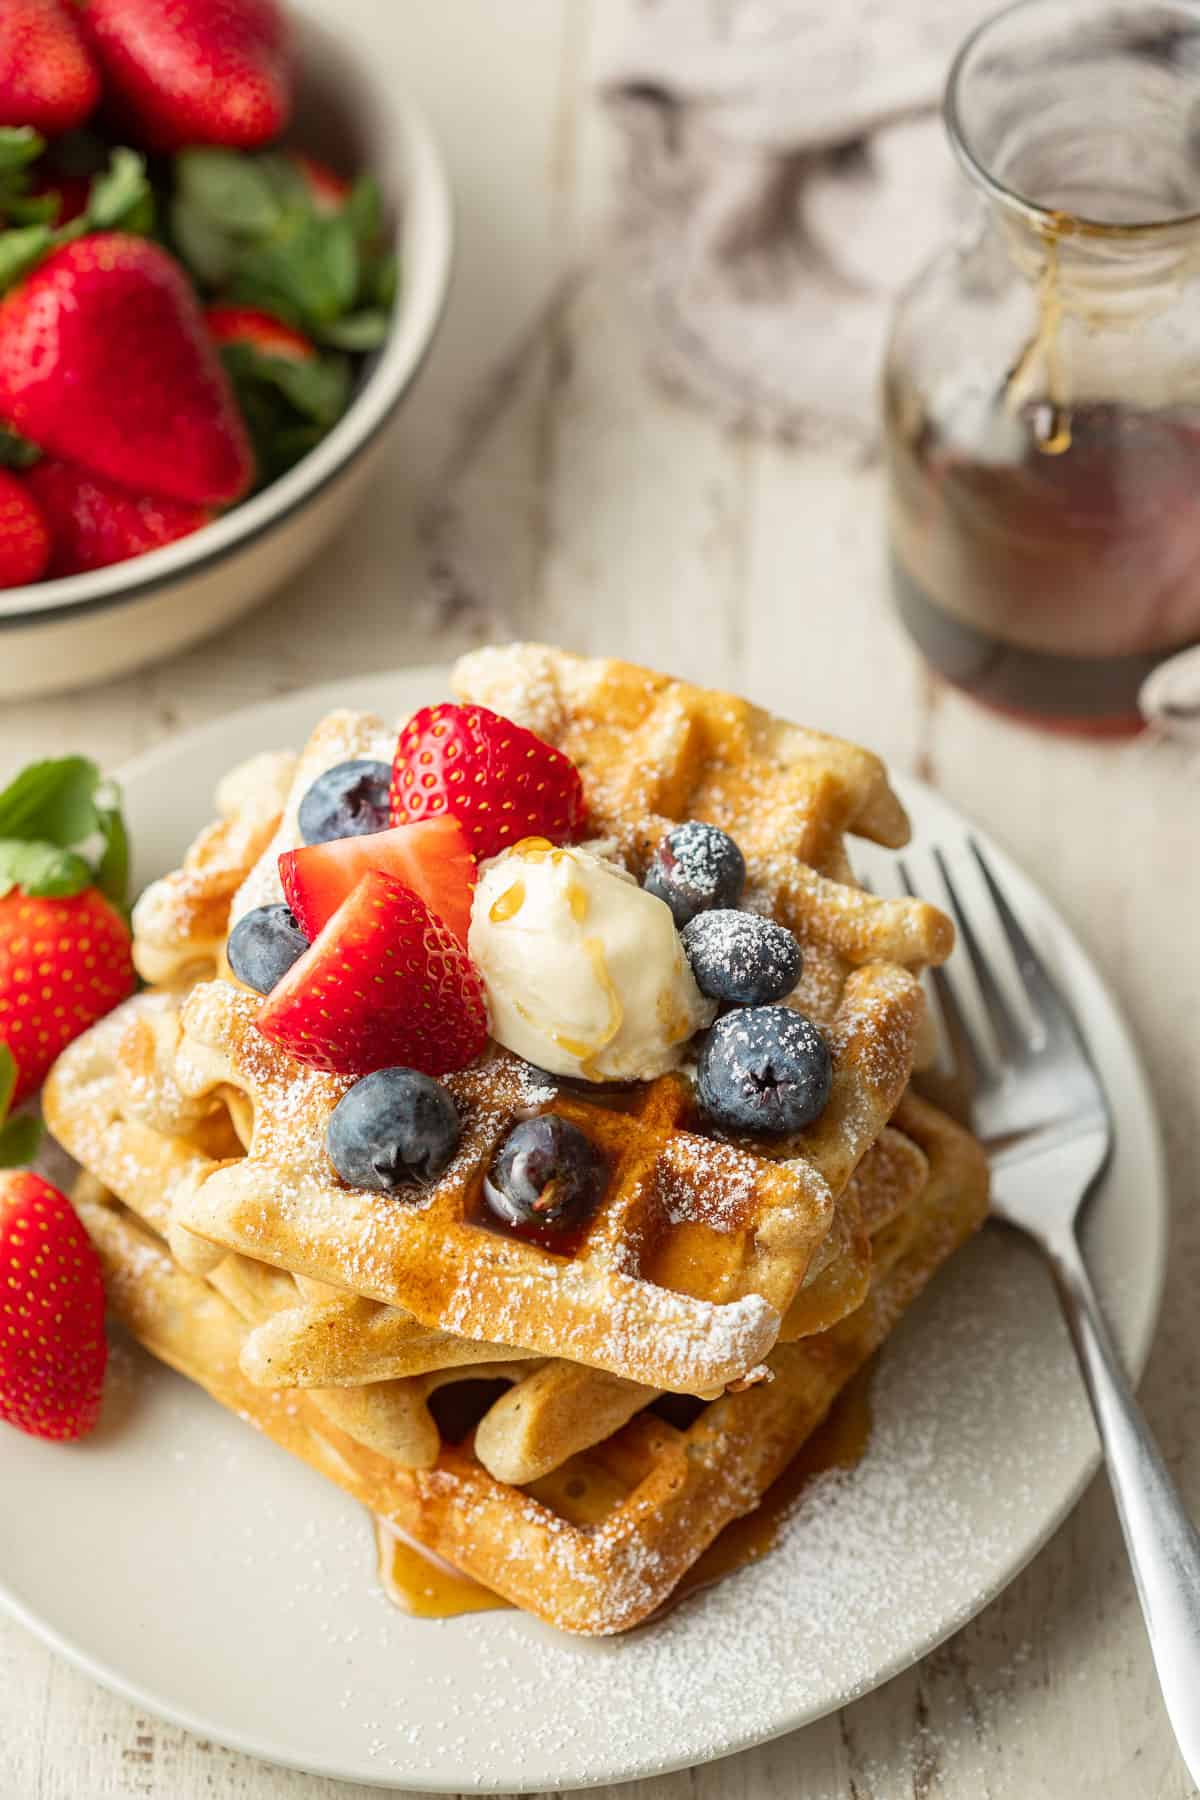 Stack of Vegan Waffles on a plate with bowl of strawberries and container of syrup in the background.